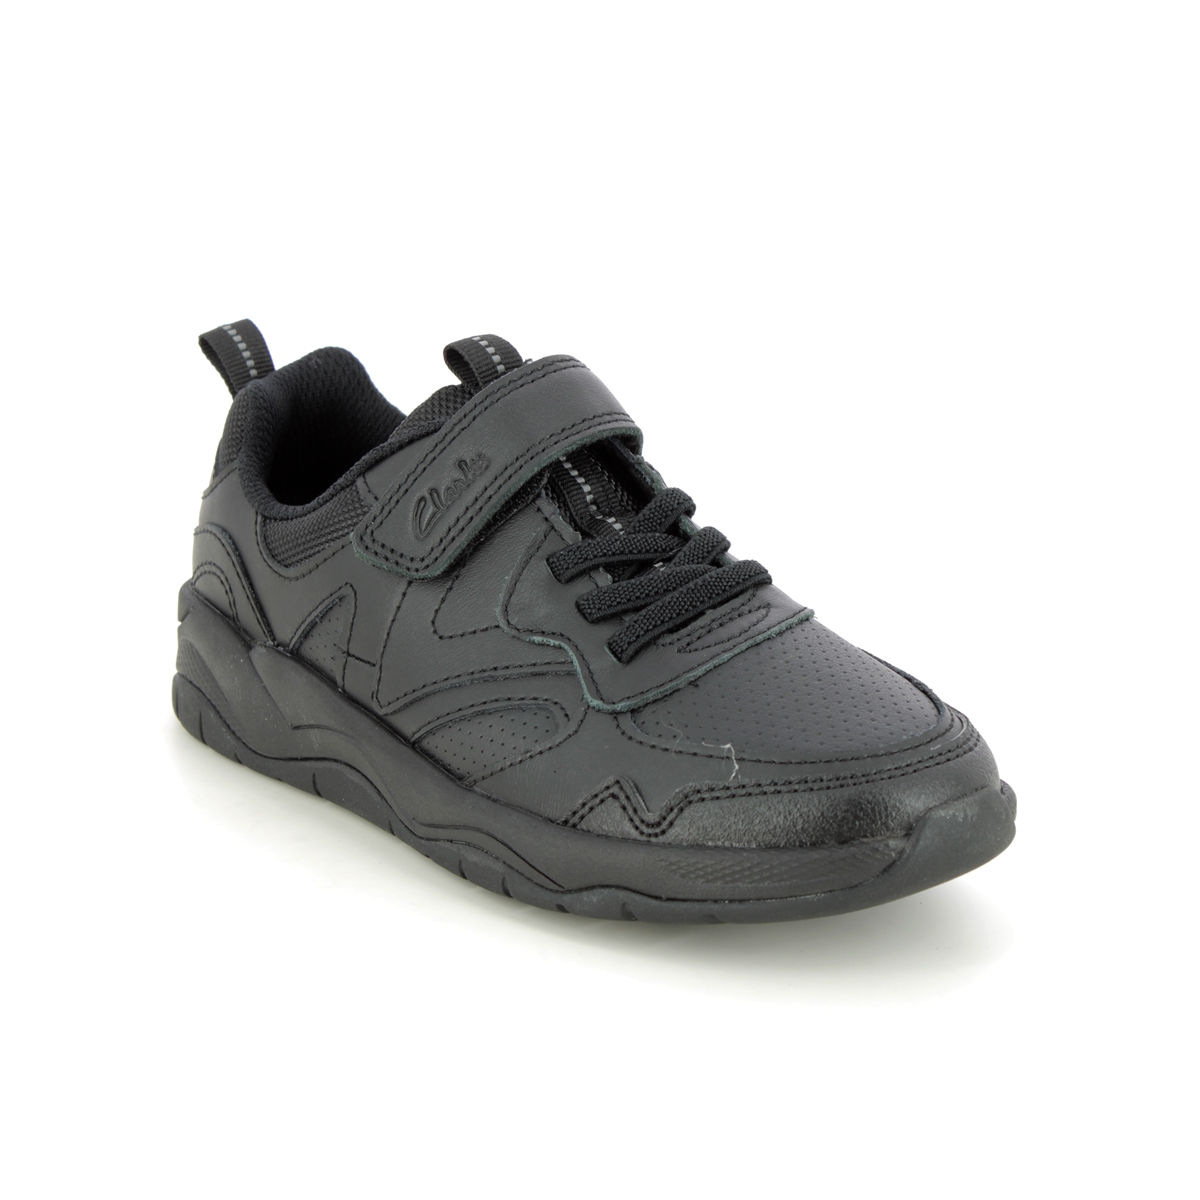 Clarks Clowder Sprint O Black Leather Kids Boys Shoes 661706F In Size 1.5 In Plain Black Leather F Width Fitting Regular Fit For School For kids